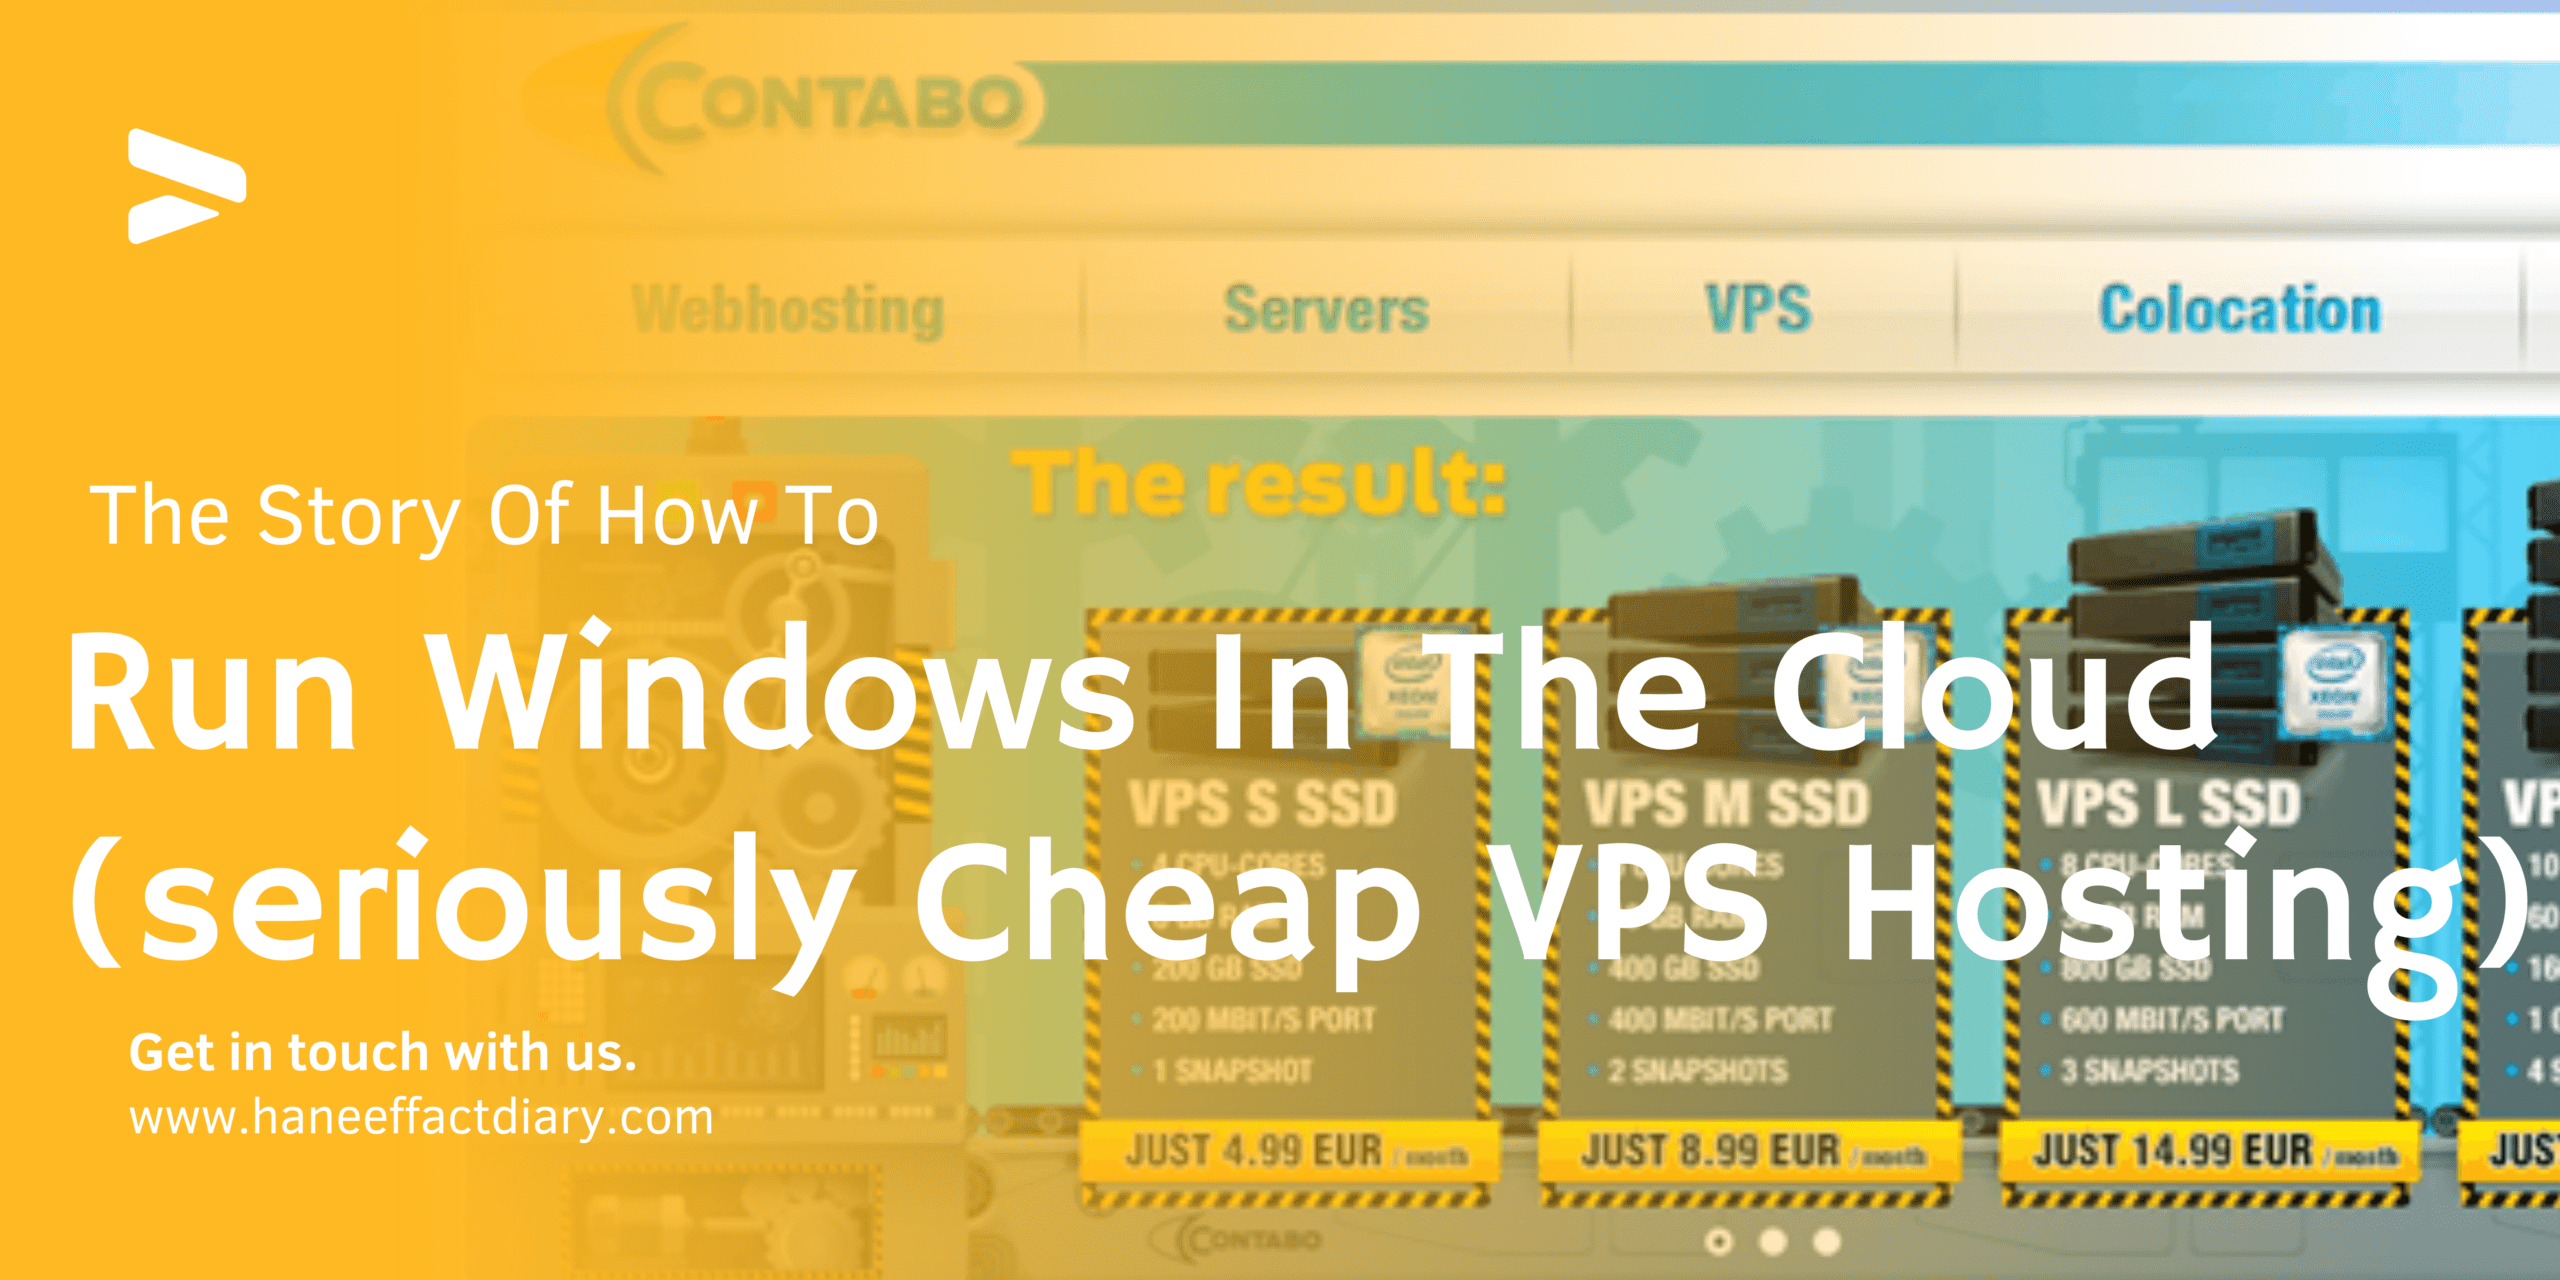 The Story Of How To Run Windows In The Cloud (seriously Cheap VPS Hosting)